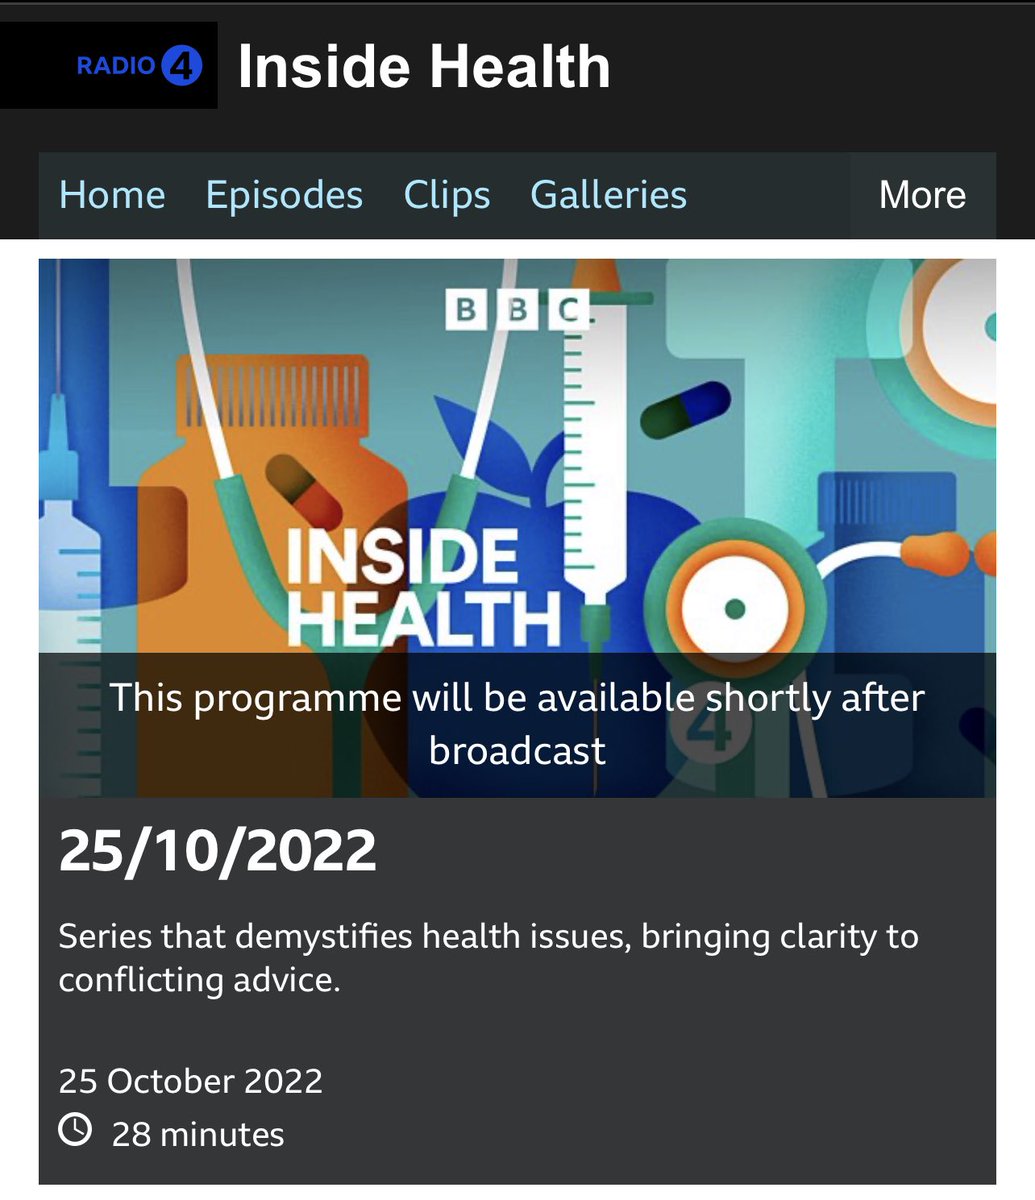 Listen to @BBCRadio4 Inside Health at 9pm GMT on Tuesday 25th October talking about my concerns re prospective patient access to records from 1st November with @JamesTGallagher and what should happen instead. Features 2 of our empowered patients bbc.co.uk/programmes/m00…